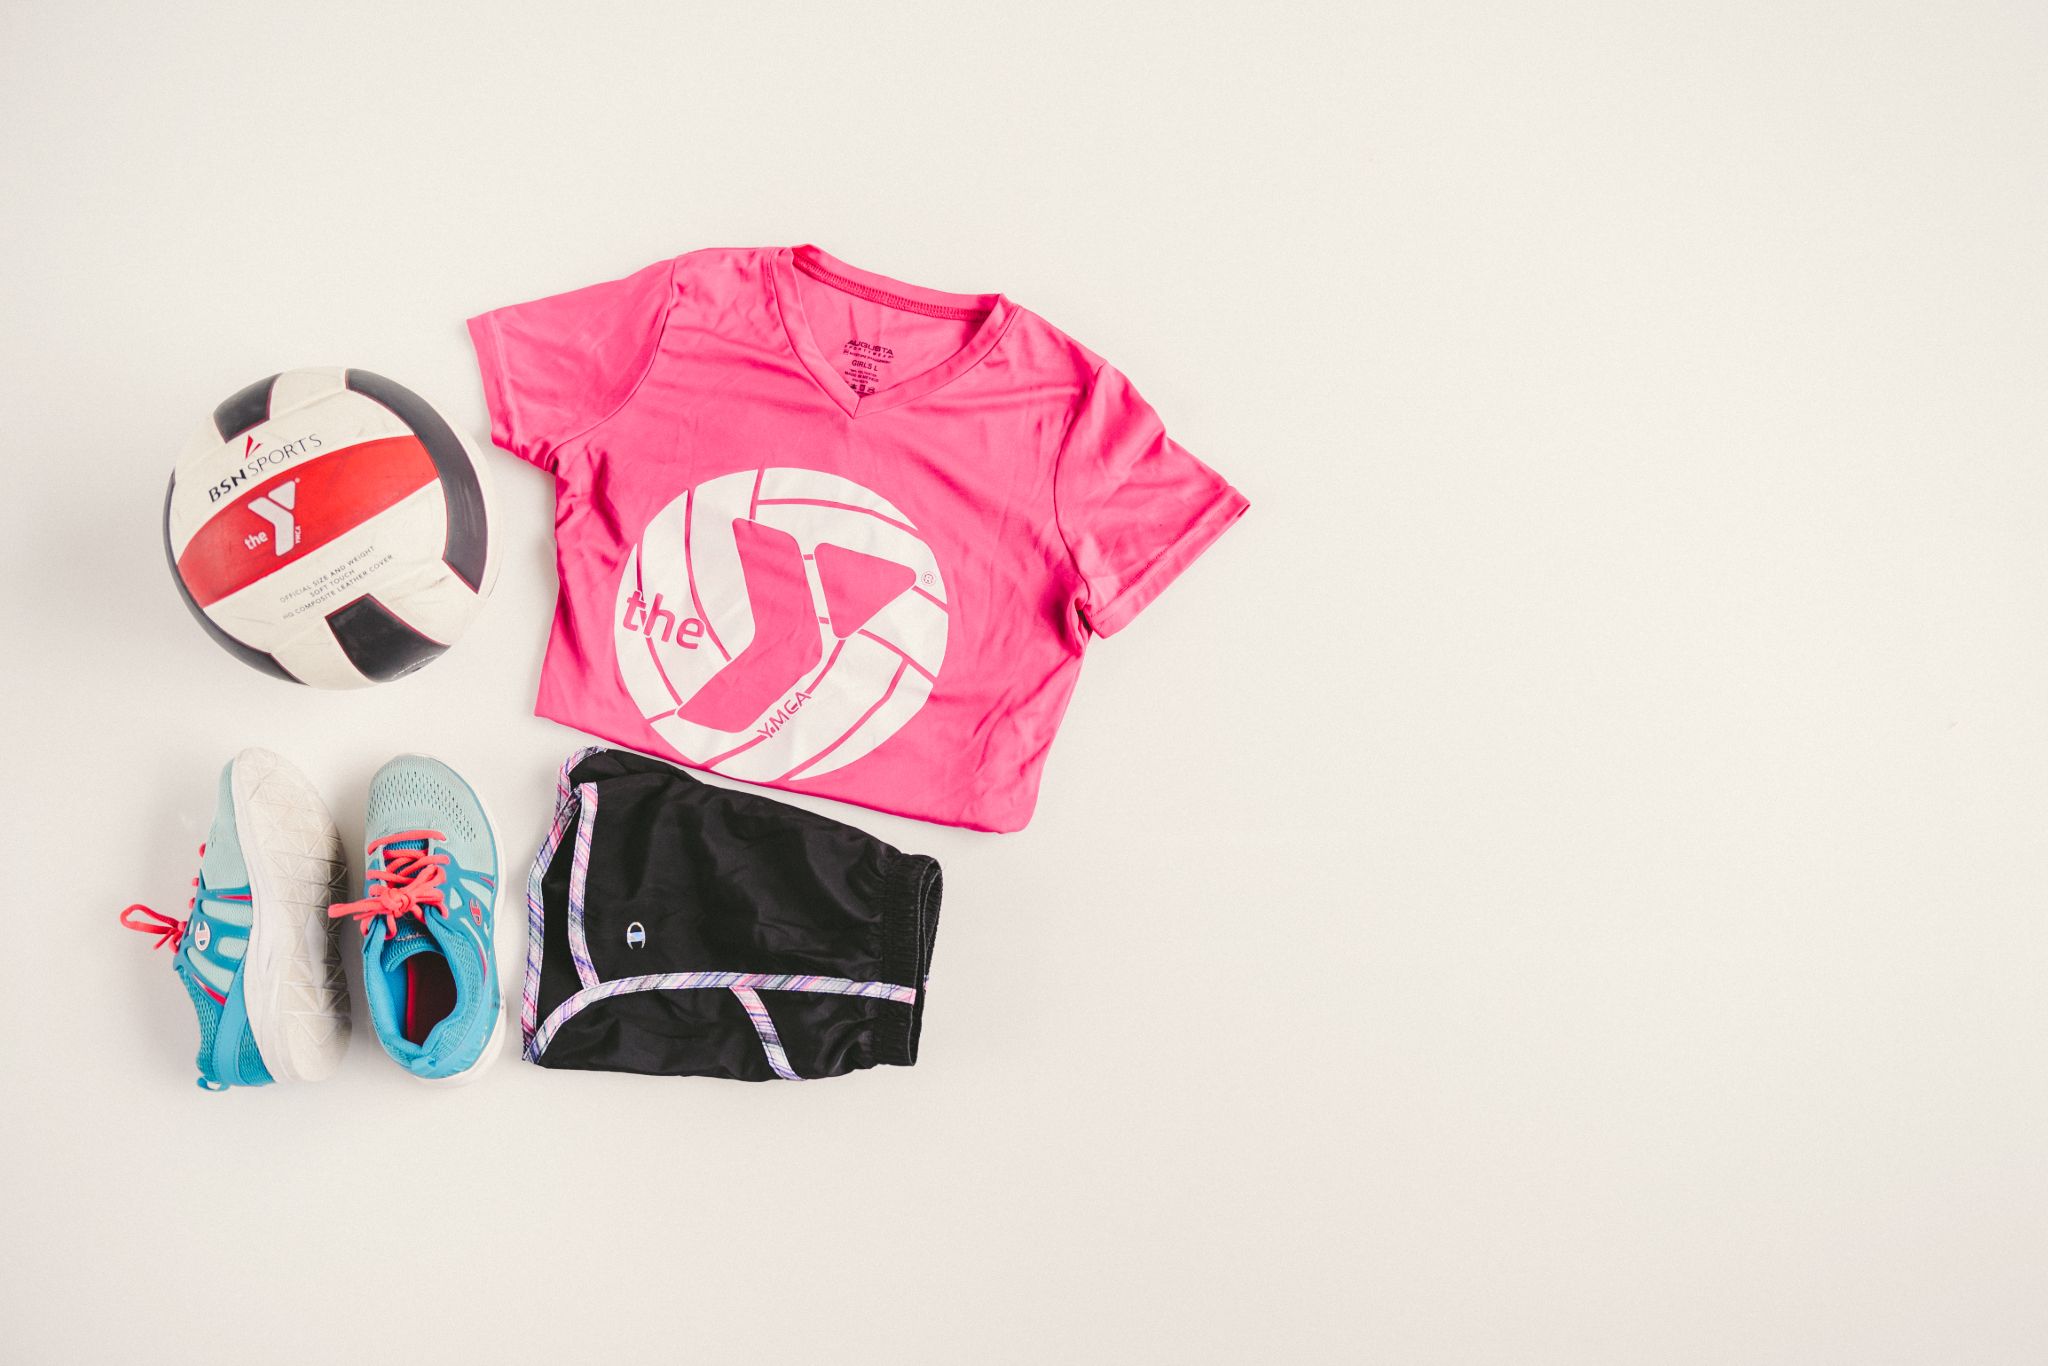 IU C&I Studios Portfolio The Y Kid black shorts, pink top, blue shoes, and soccer ball on display